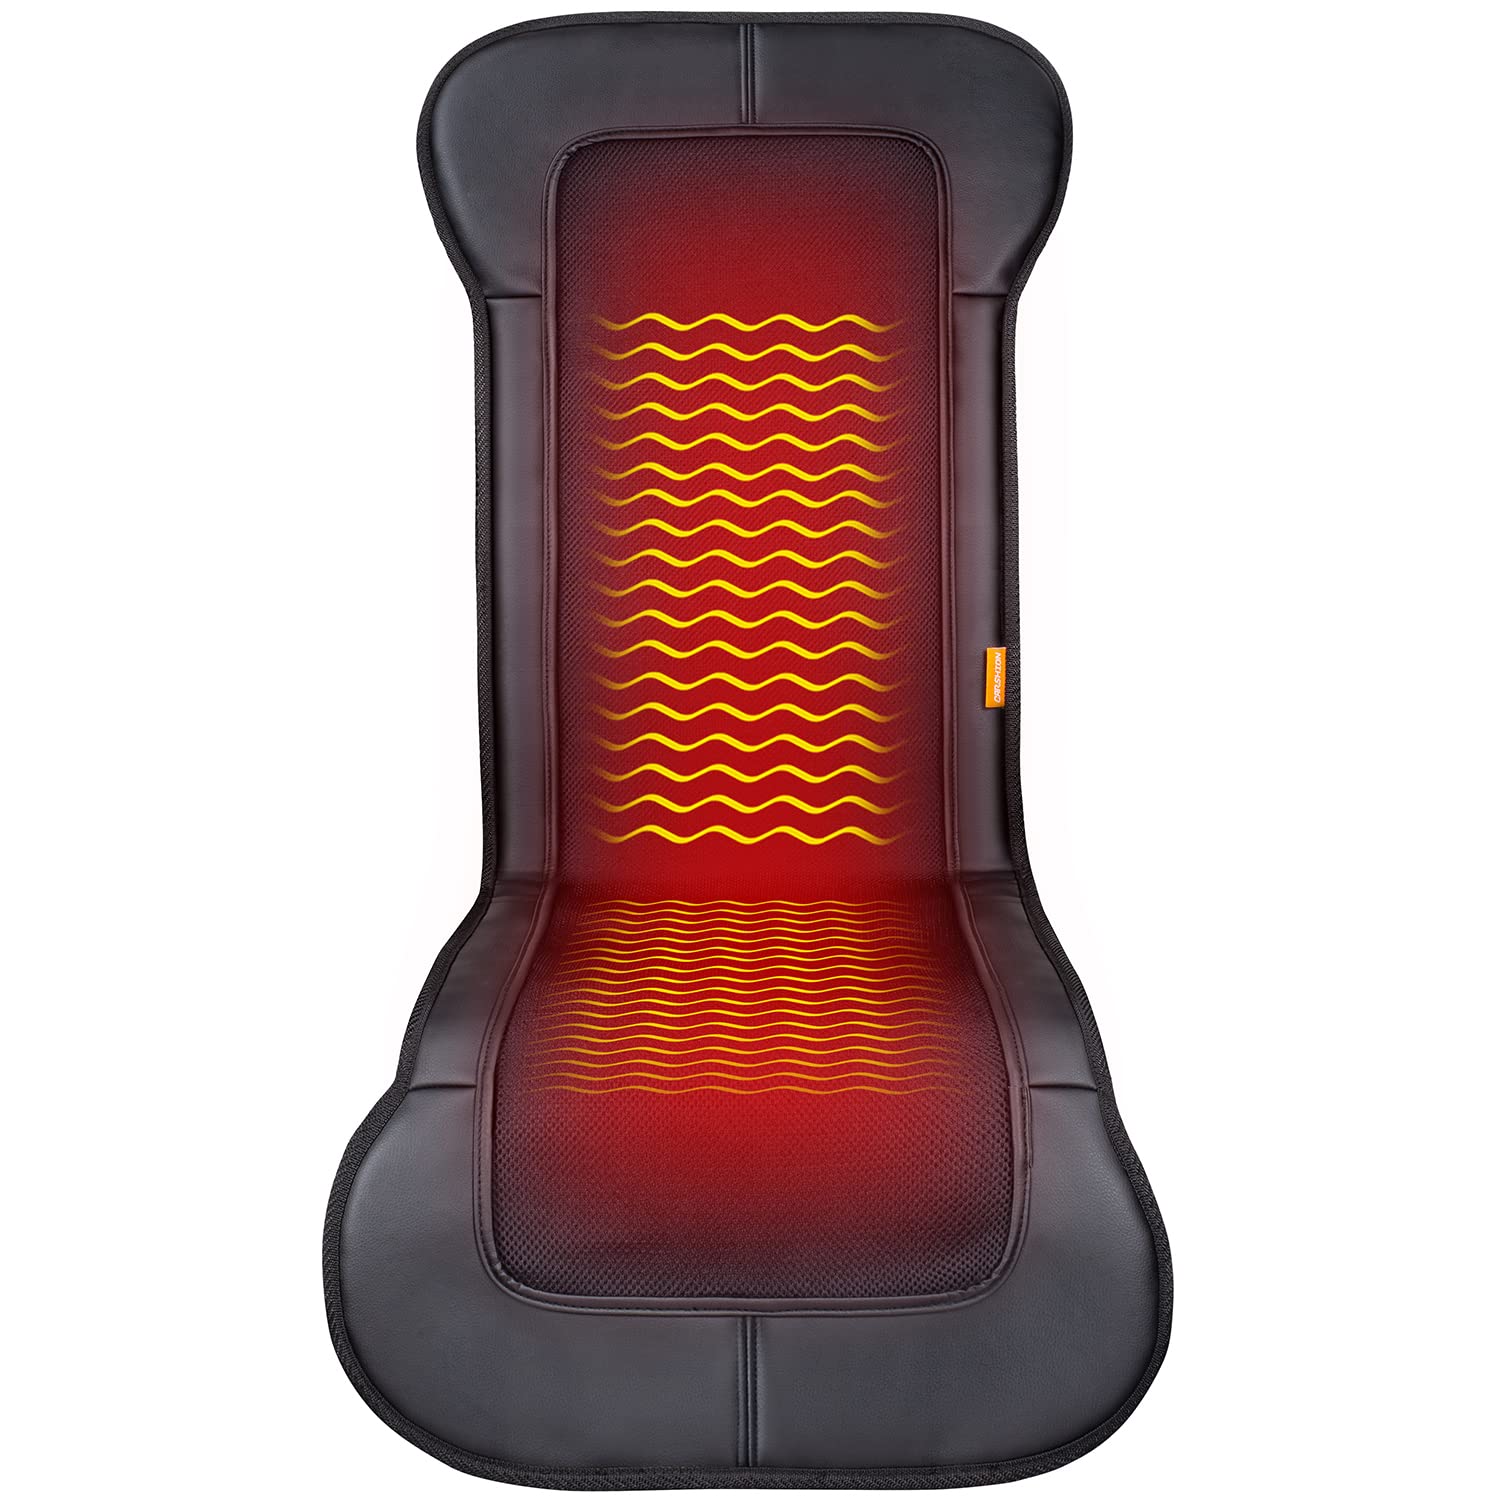 CARSHION Heated Seat Cover Longer in Size Pu Leather with Fast-Heating  Technology for Back Waist Thighs to Reduce Stress